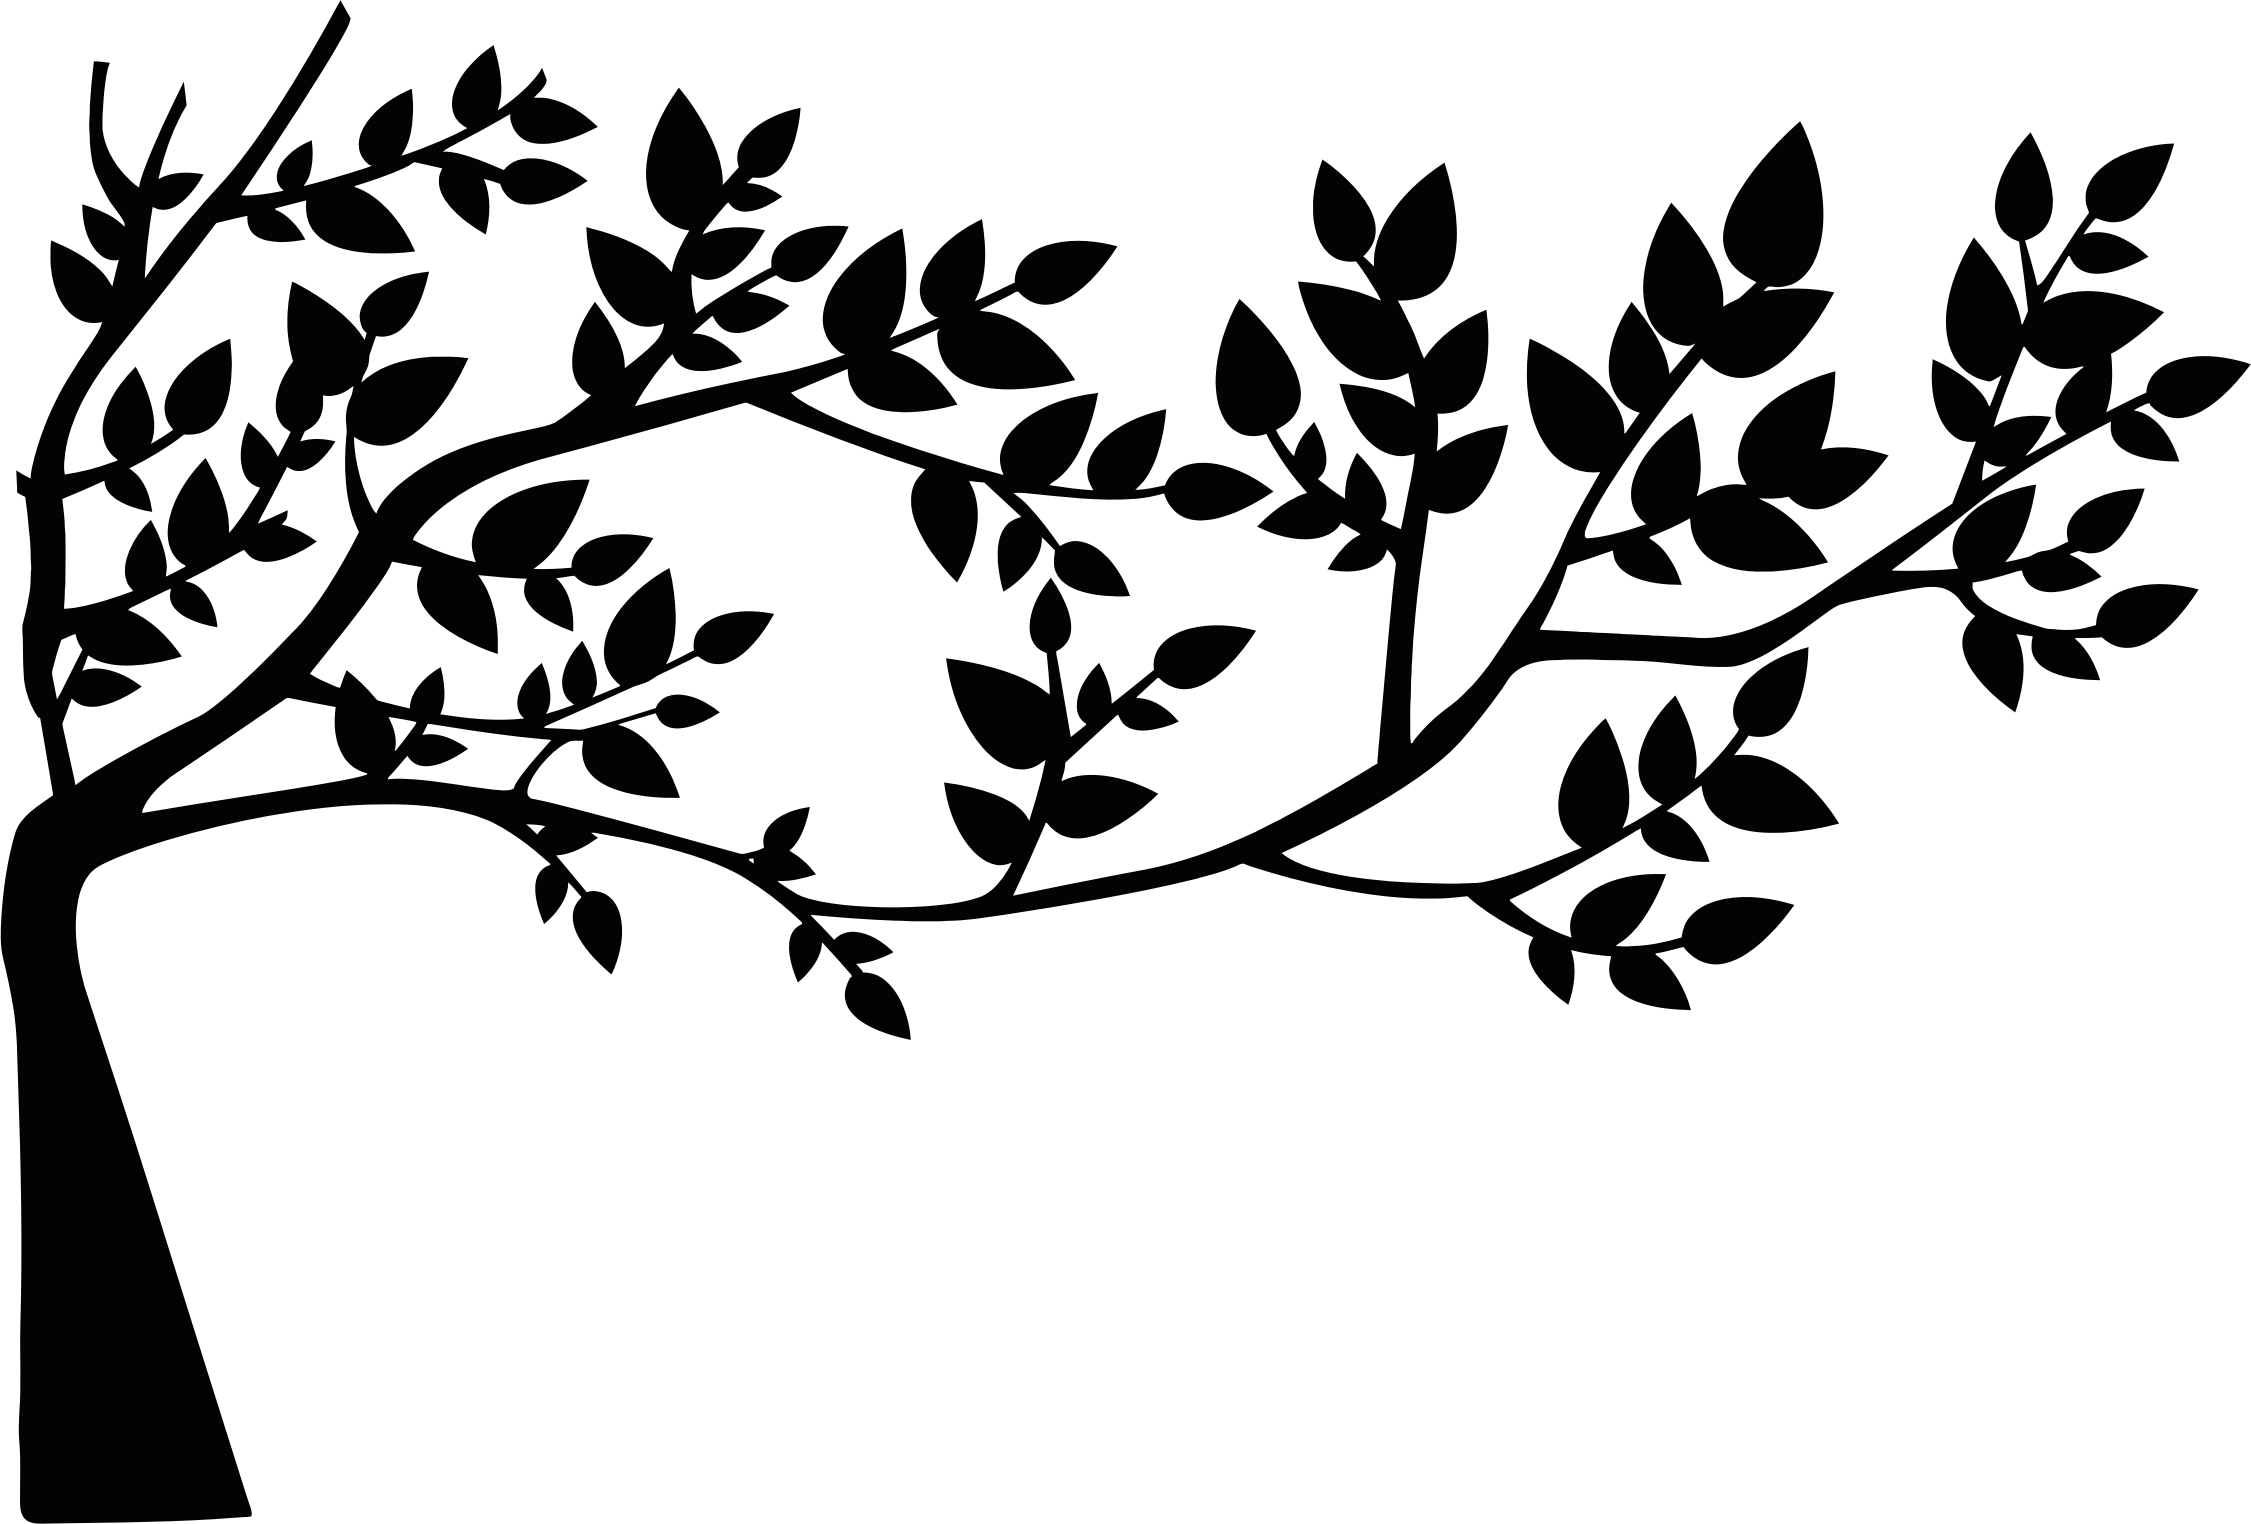 This Free Icons Png Design Of Tree And Leaves Silhouette - Tree With Leaves Silhouette (2251x1524)